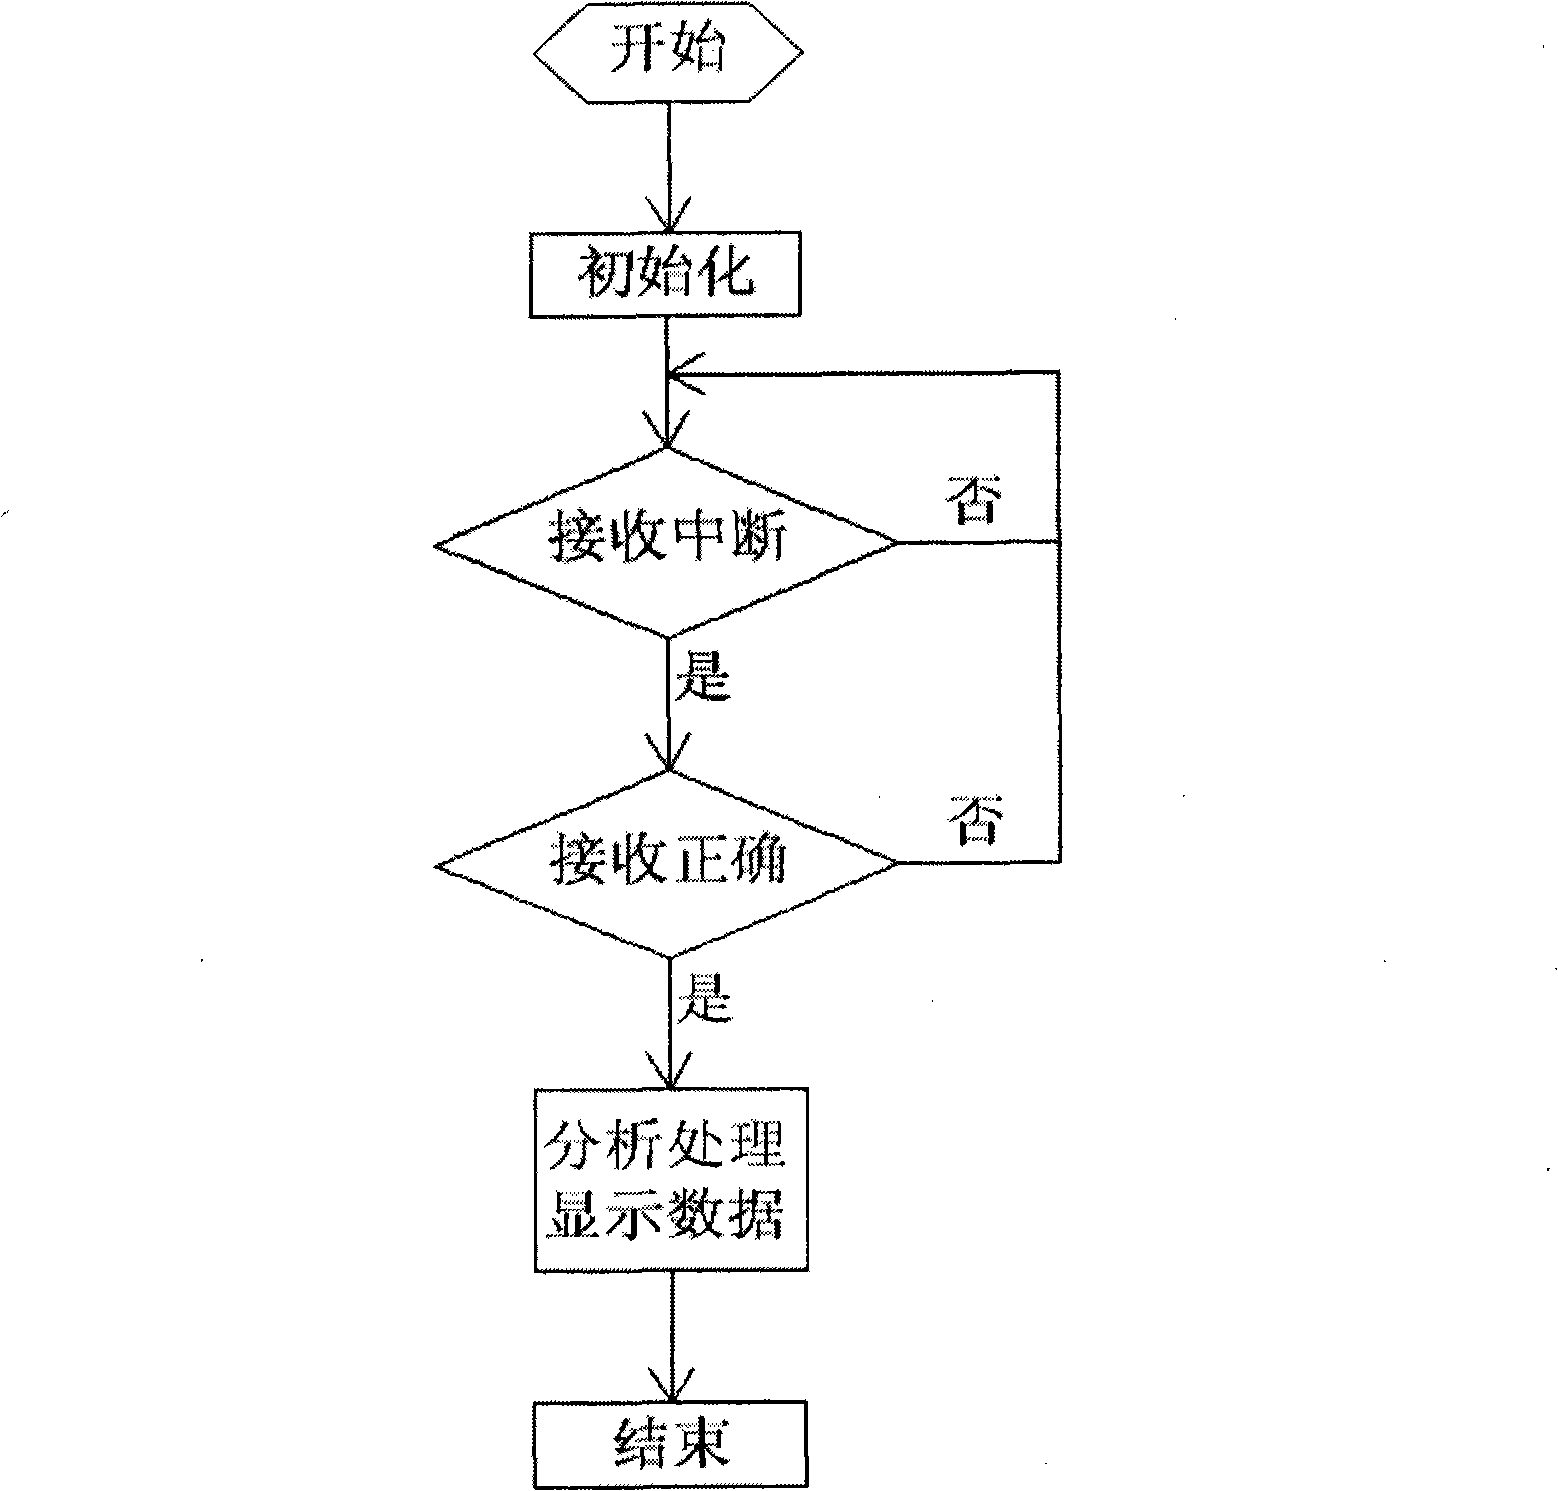 Man-machine interactive system of thermal management system and control method thereof